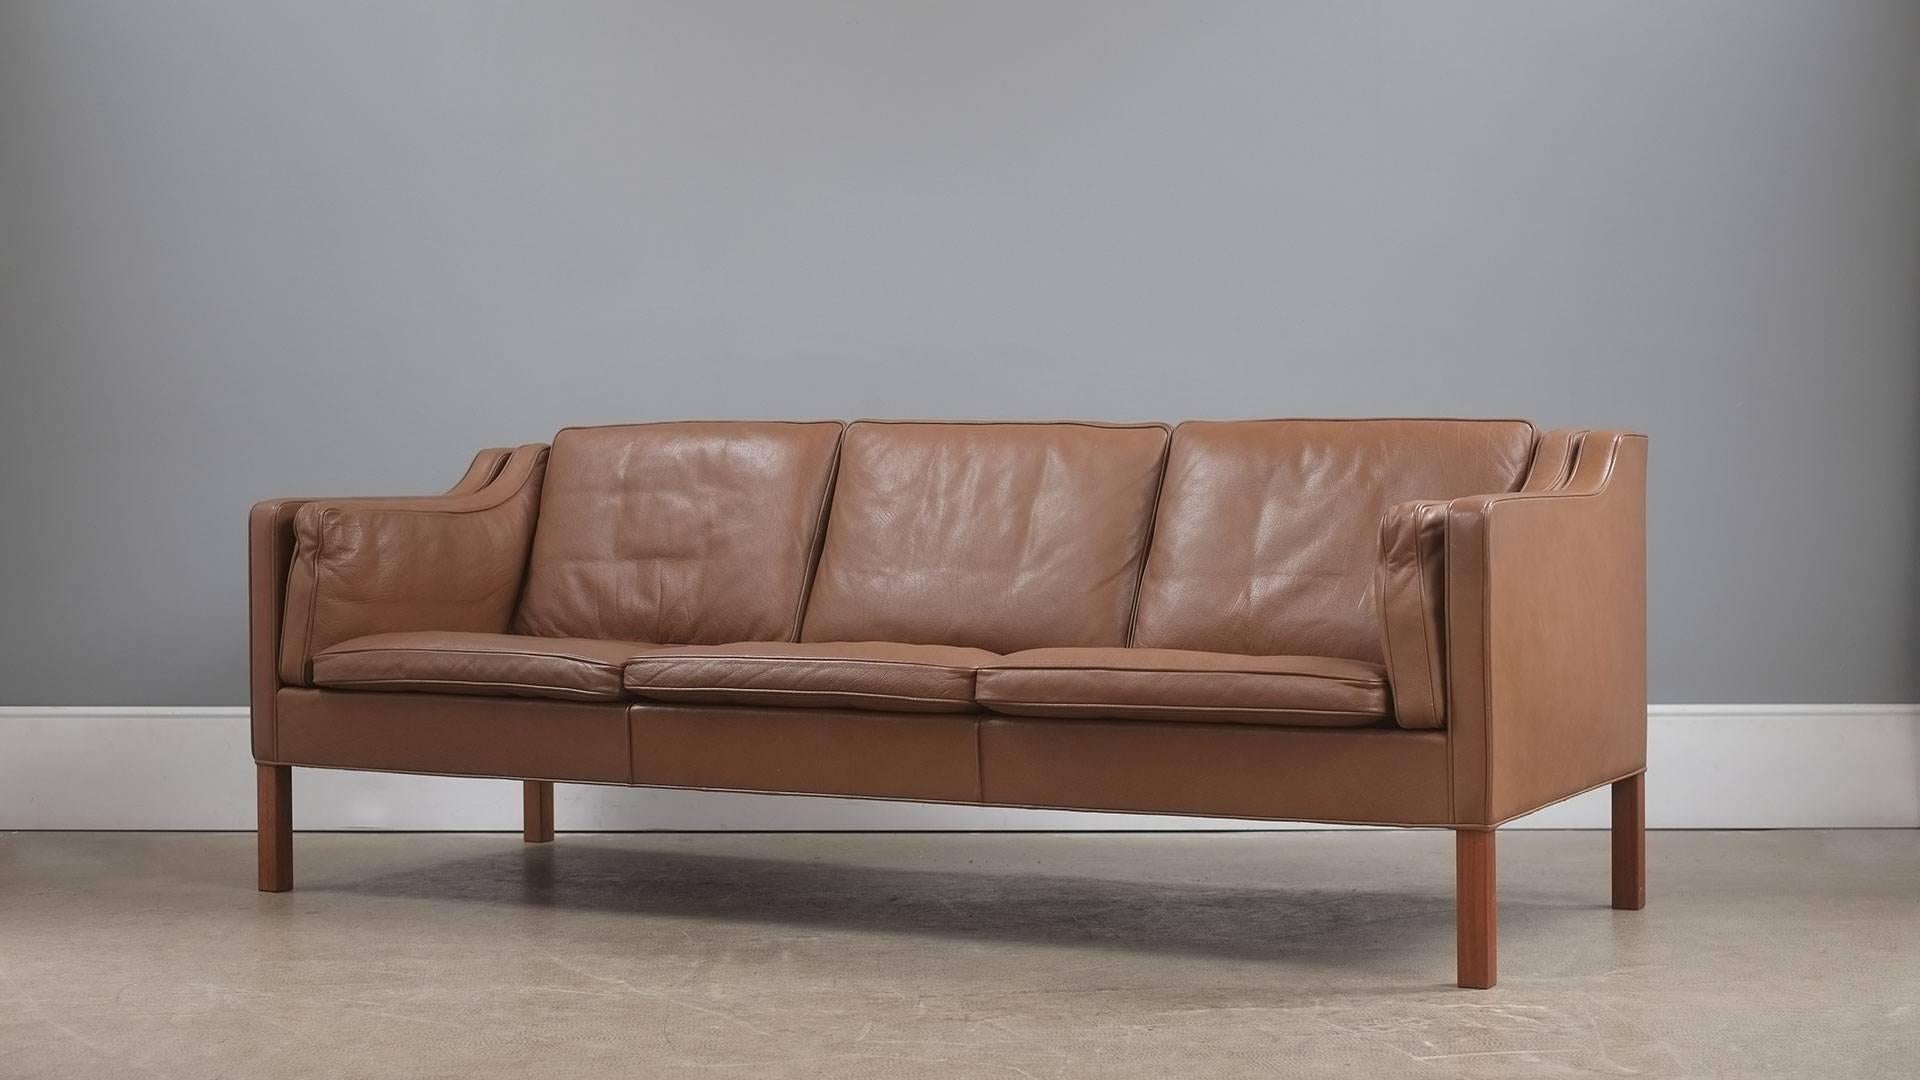 The real thing fantastic example of the Classic three seat sofa designed by Børge Mogensen for Fredericia, Denmark model 2213. Unsurpassed quality and in beautiful light brown leather with solid teak legs. Wonderful example.